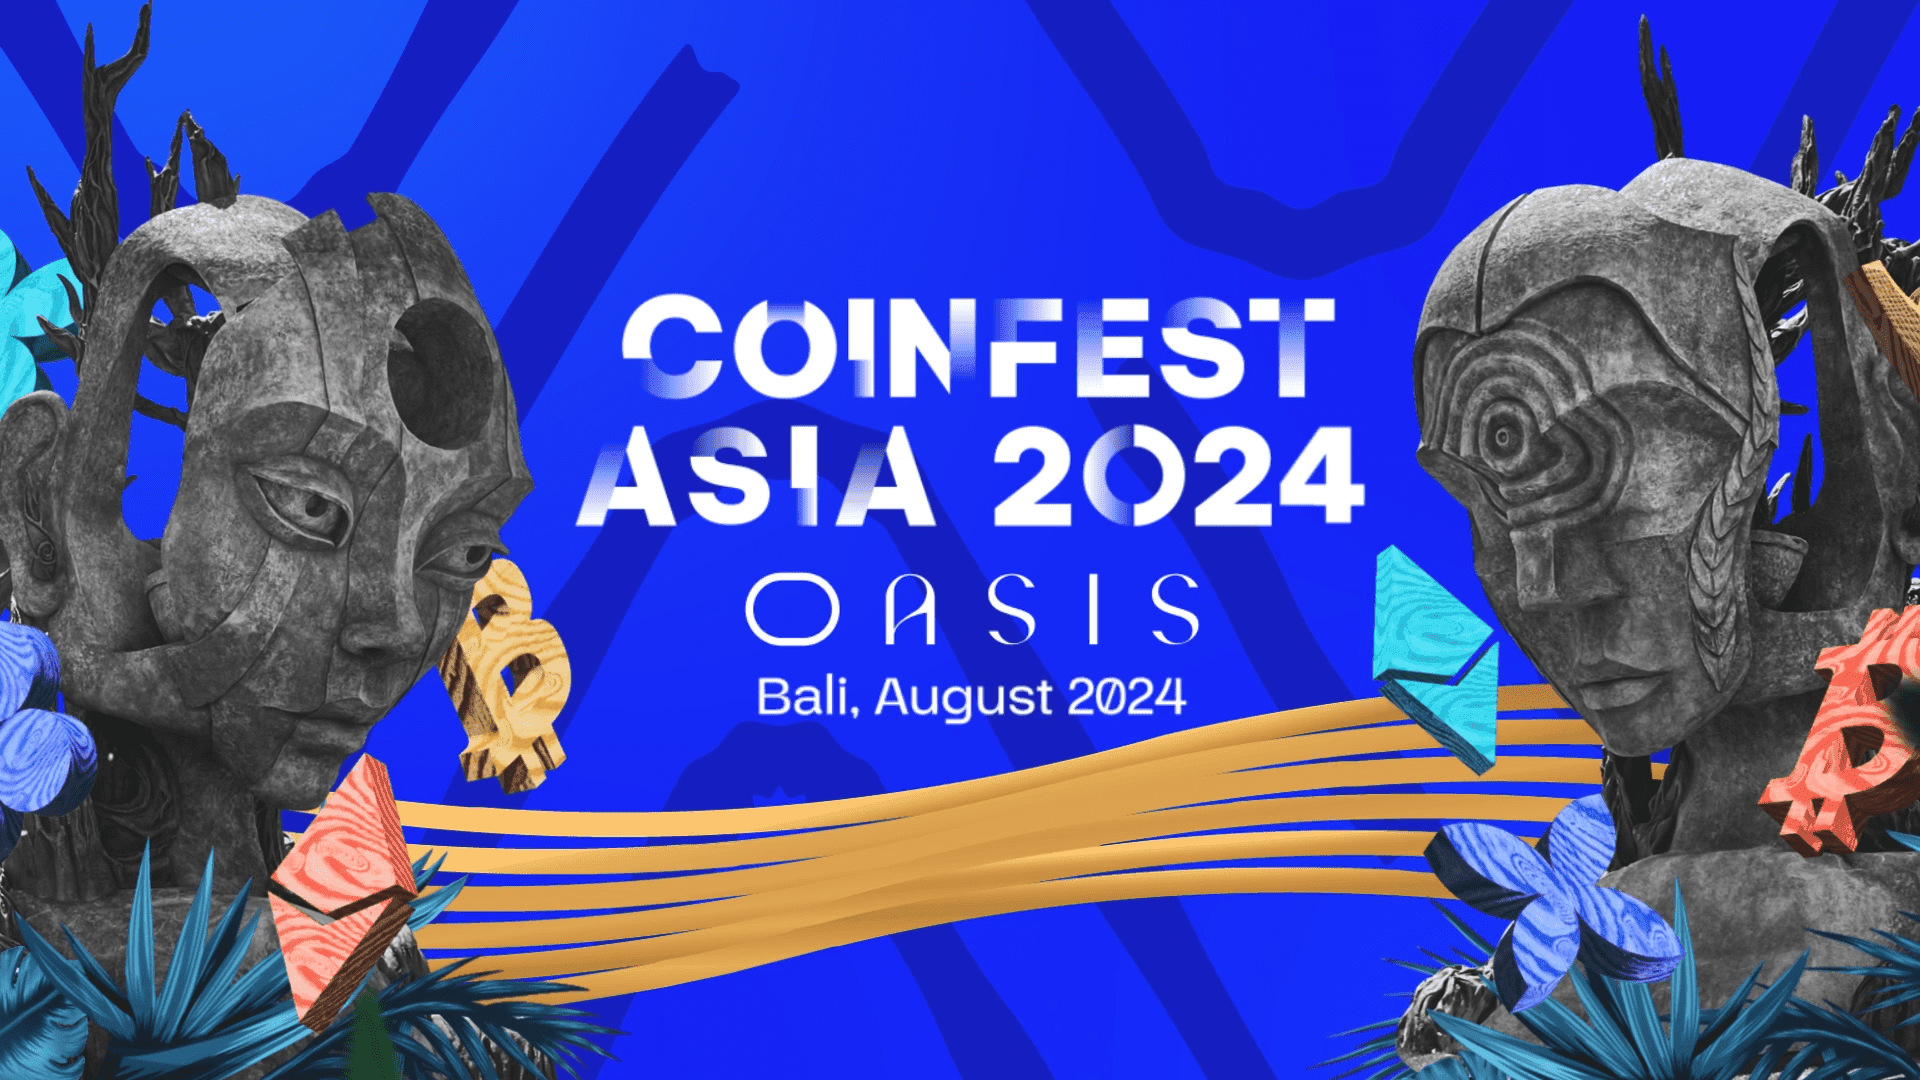 Tickets Coinfest Asia 2024